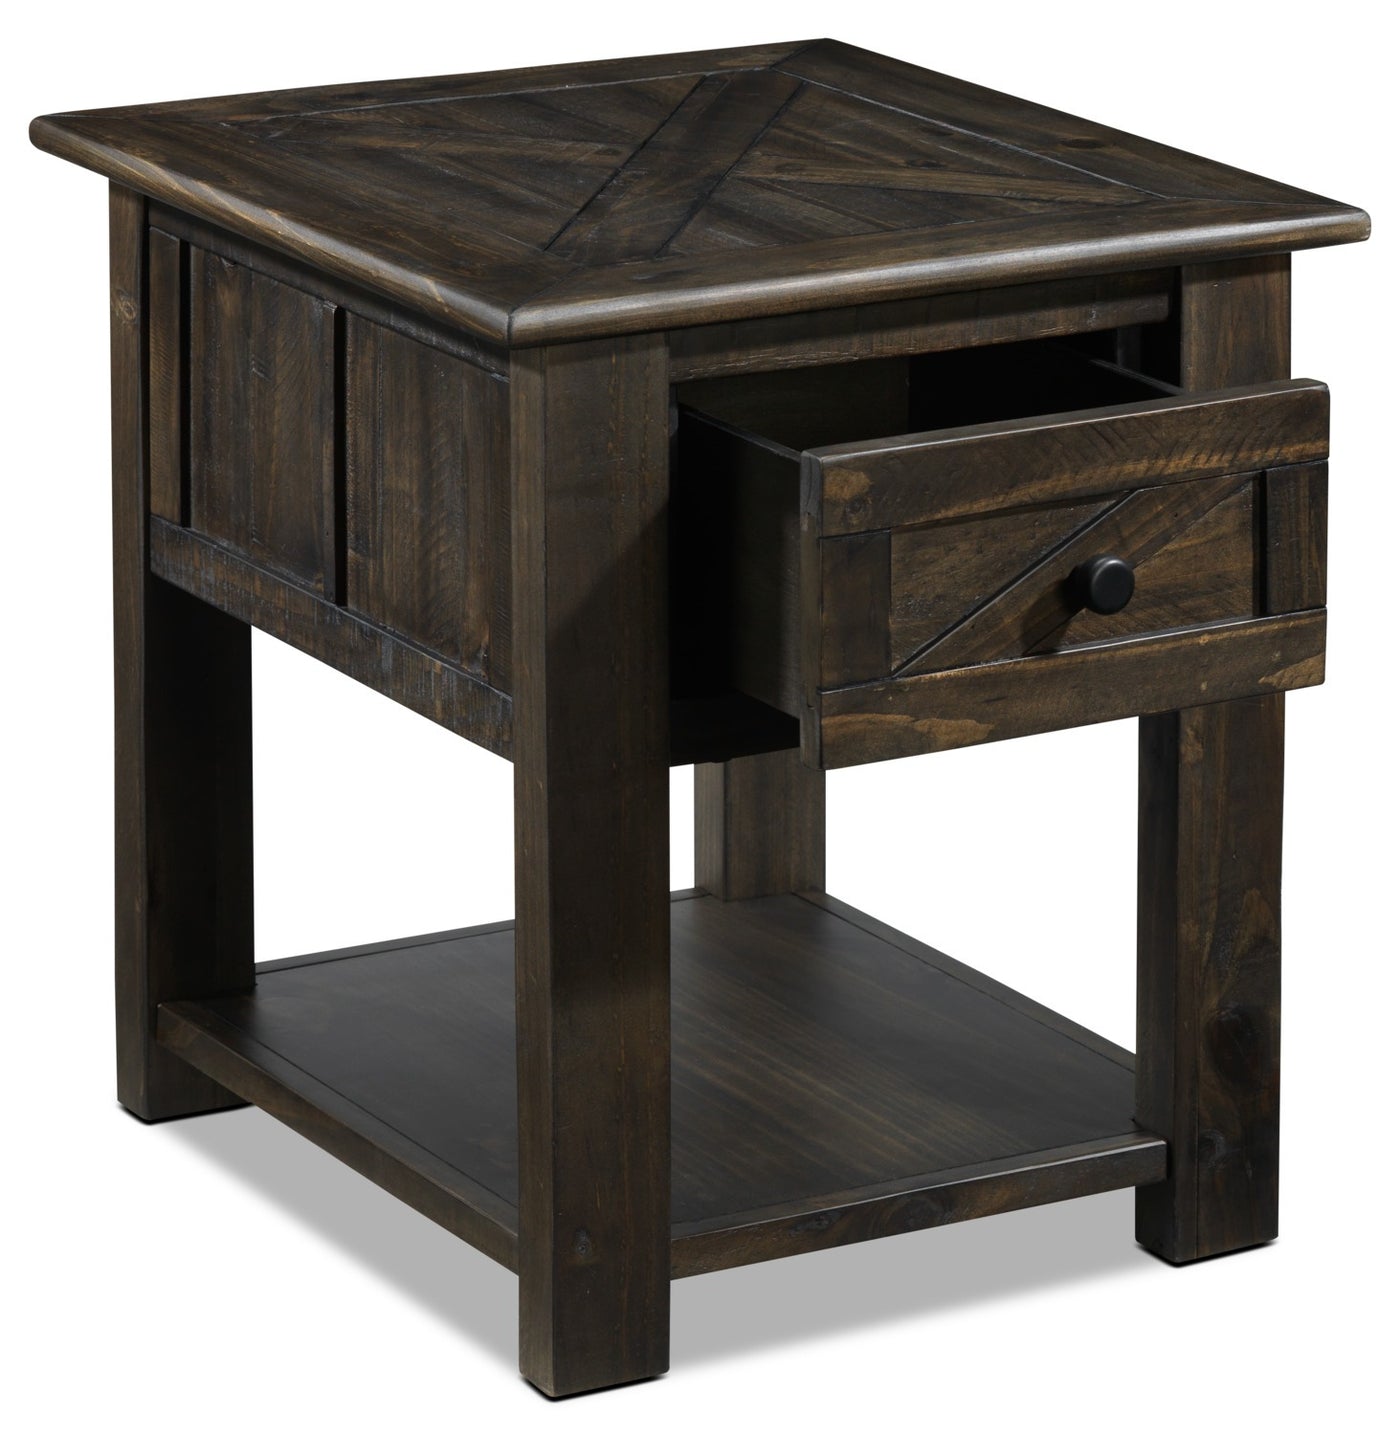 Gable End Table - Weathered Charcoal